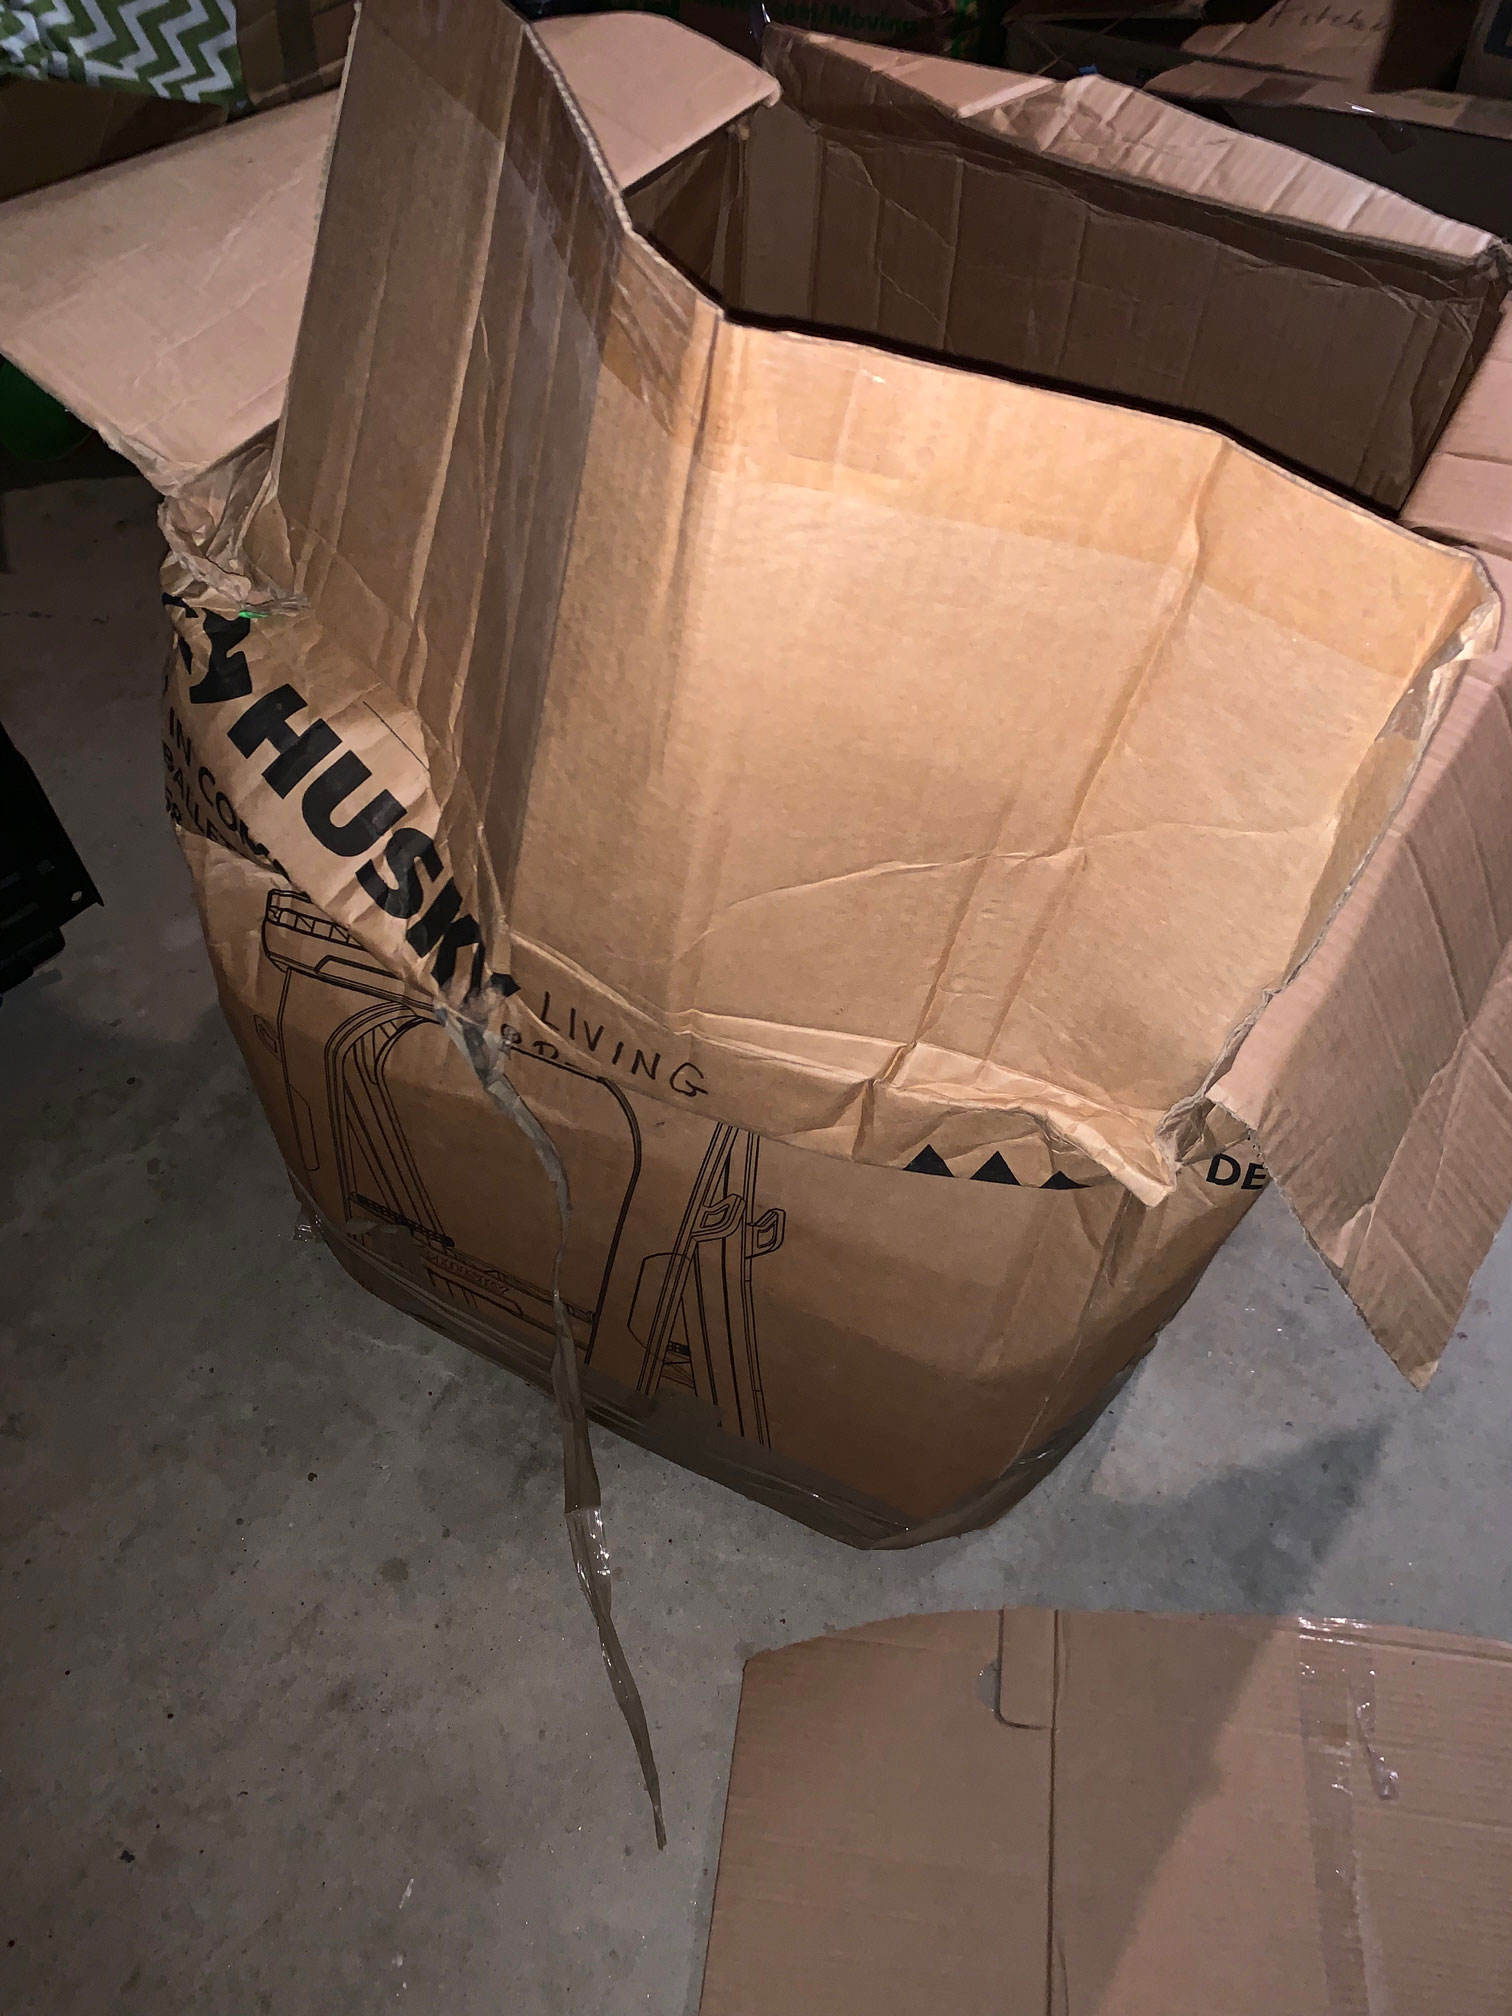 One of many boxes destroyed. Photos dont lie